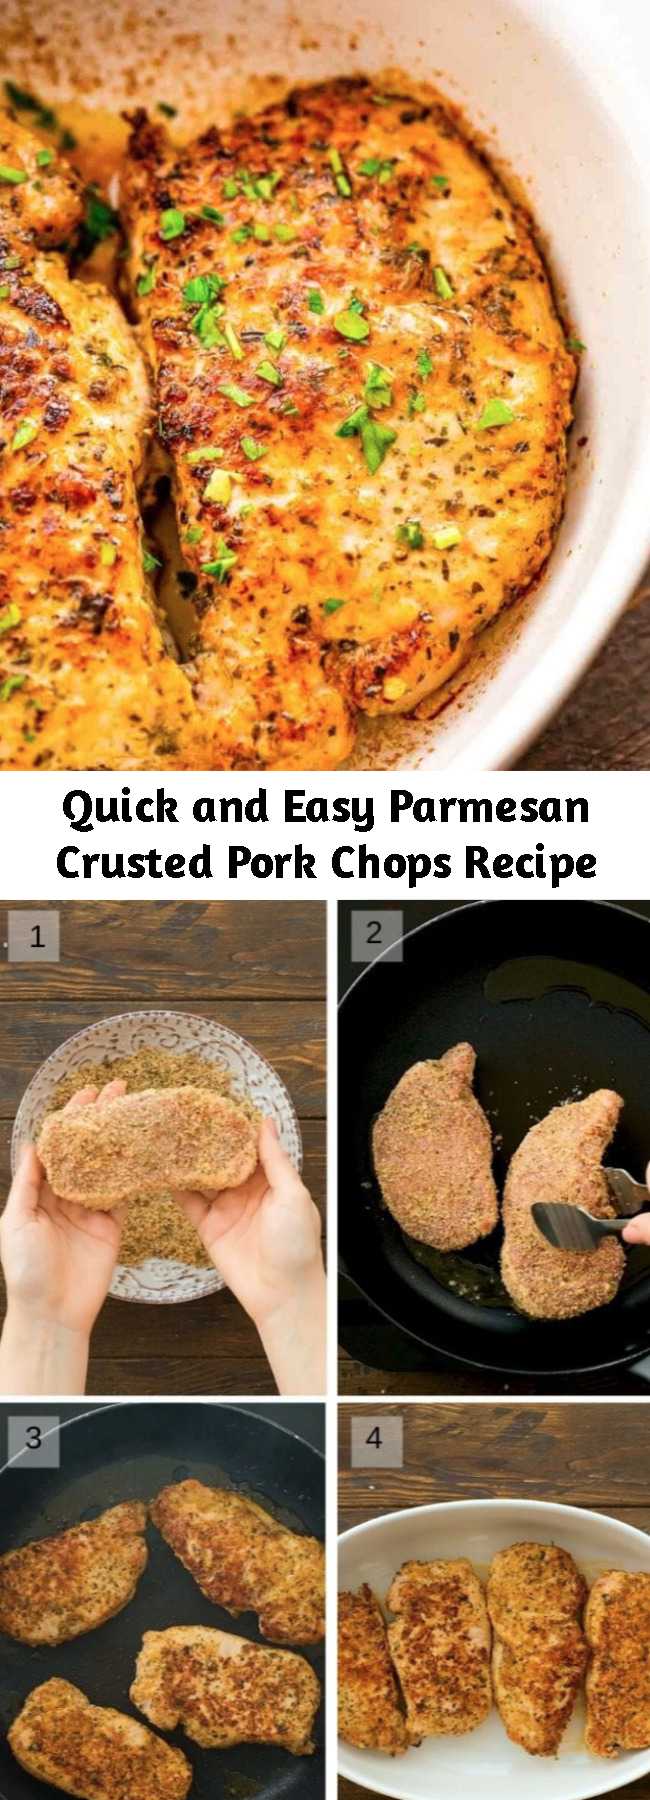 Quick and Easy Parmesan Crusted Pork Chops Recipe - Parmesan Crusted Pork Chops are breaded with a crunchy, flavorful coating, seared and baked. These boneless pork chops are tender, juicy and delicious. Such an easy dinner recipe that the entire family will love. If you need a new pork chop recipe this is it. No more dry, chewy pork chops that you fear! #porkchops #recipe